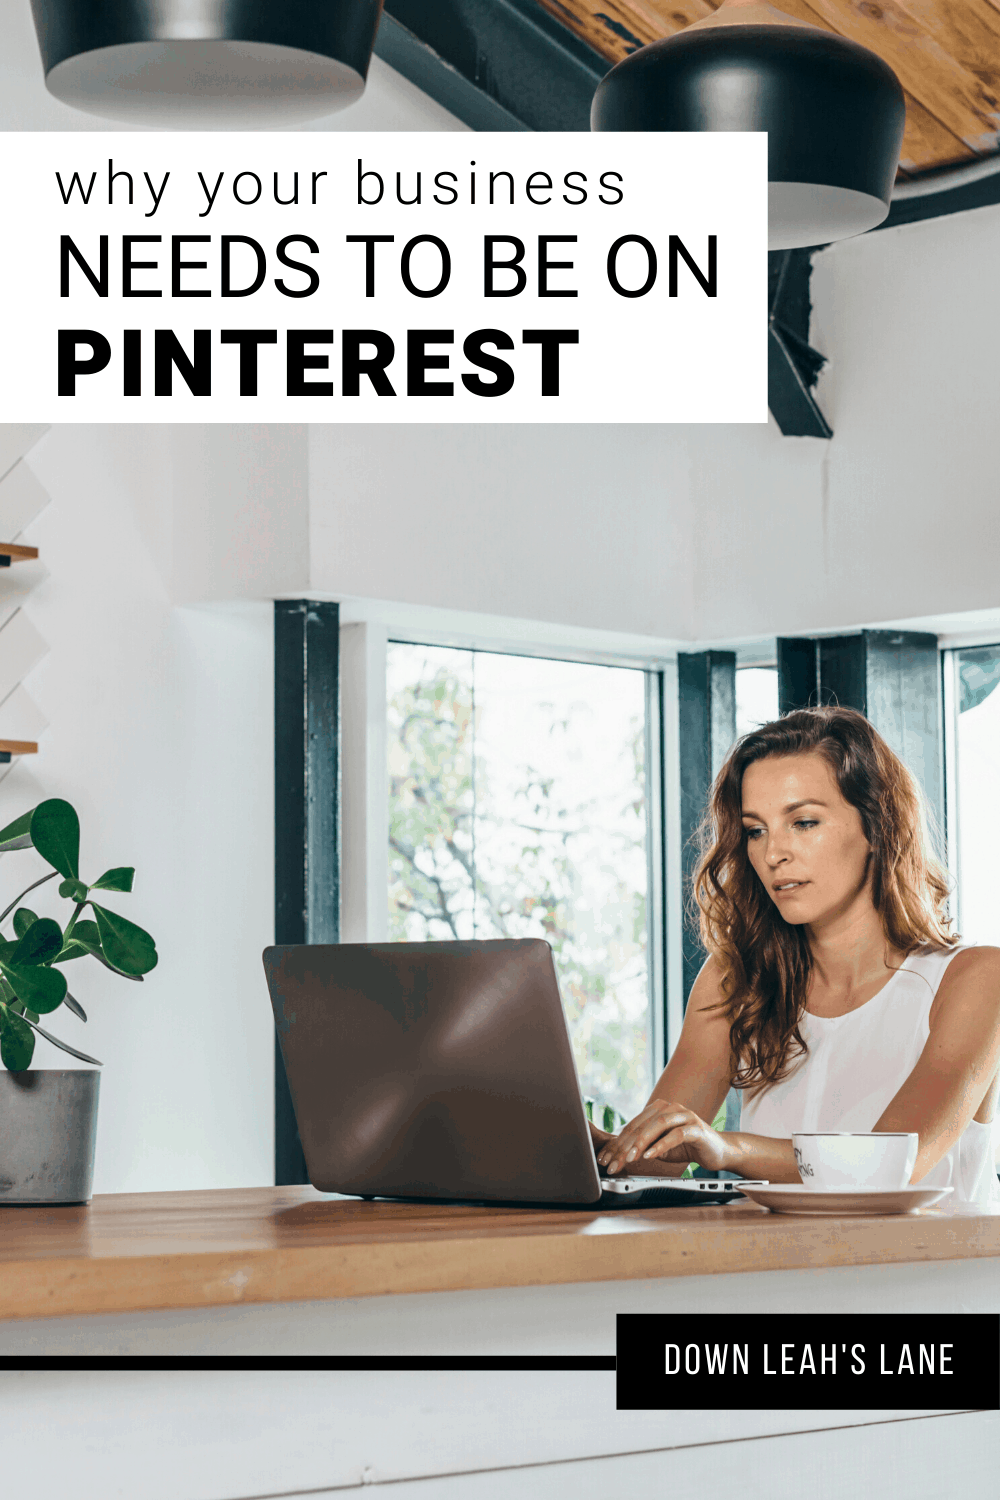 Confused on where to start with Pinterest? Getting your business account set up the right way is the first thing to do. I've created an easy to follow, step by step workbook to walk you through the correct way to set up your Pinterest Business Account.